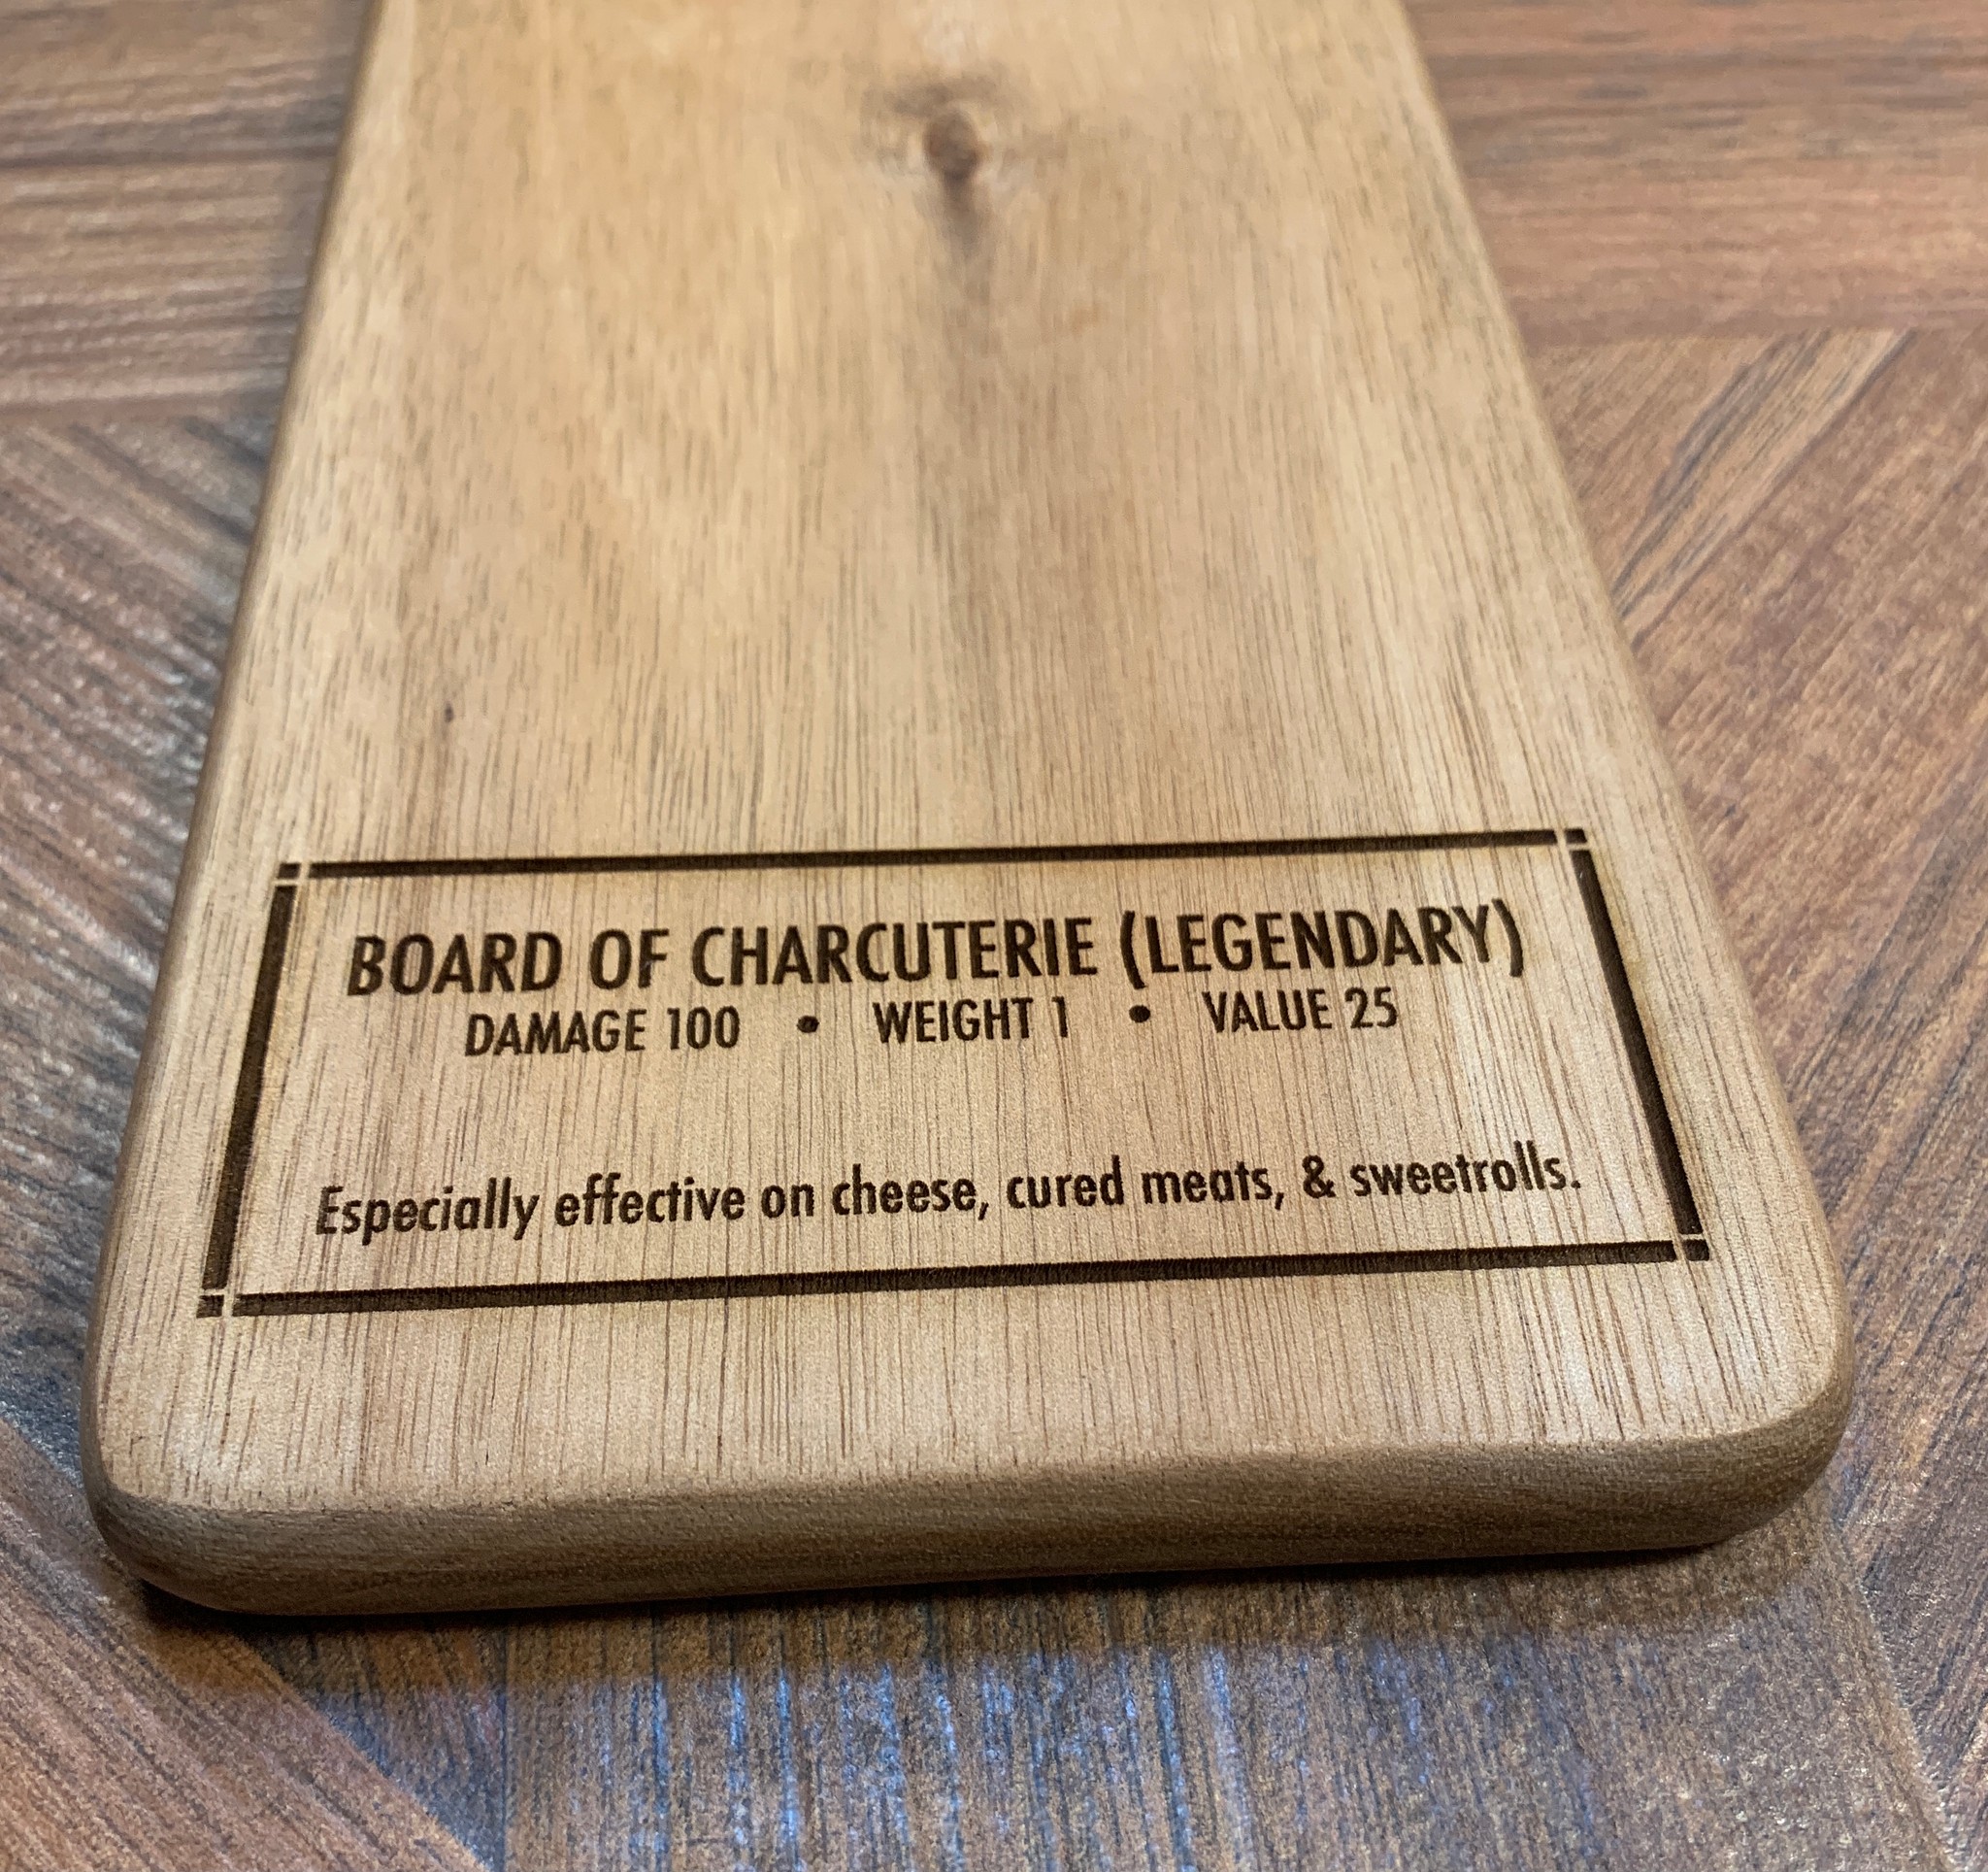 Legendary Board of Charcuterie (Long) SOLD OUT